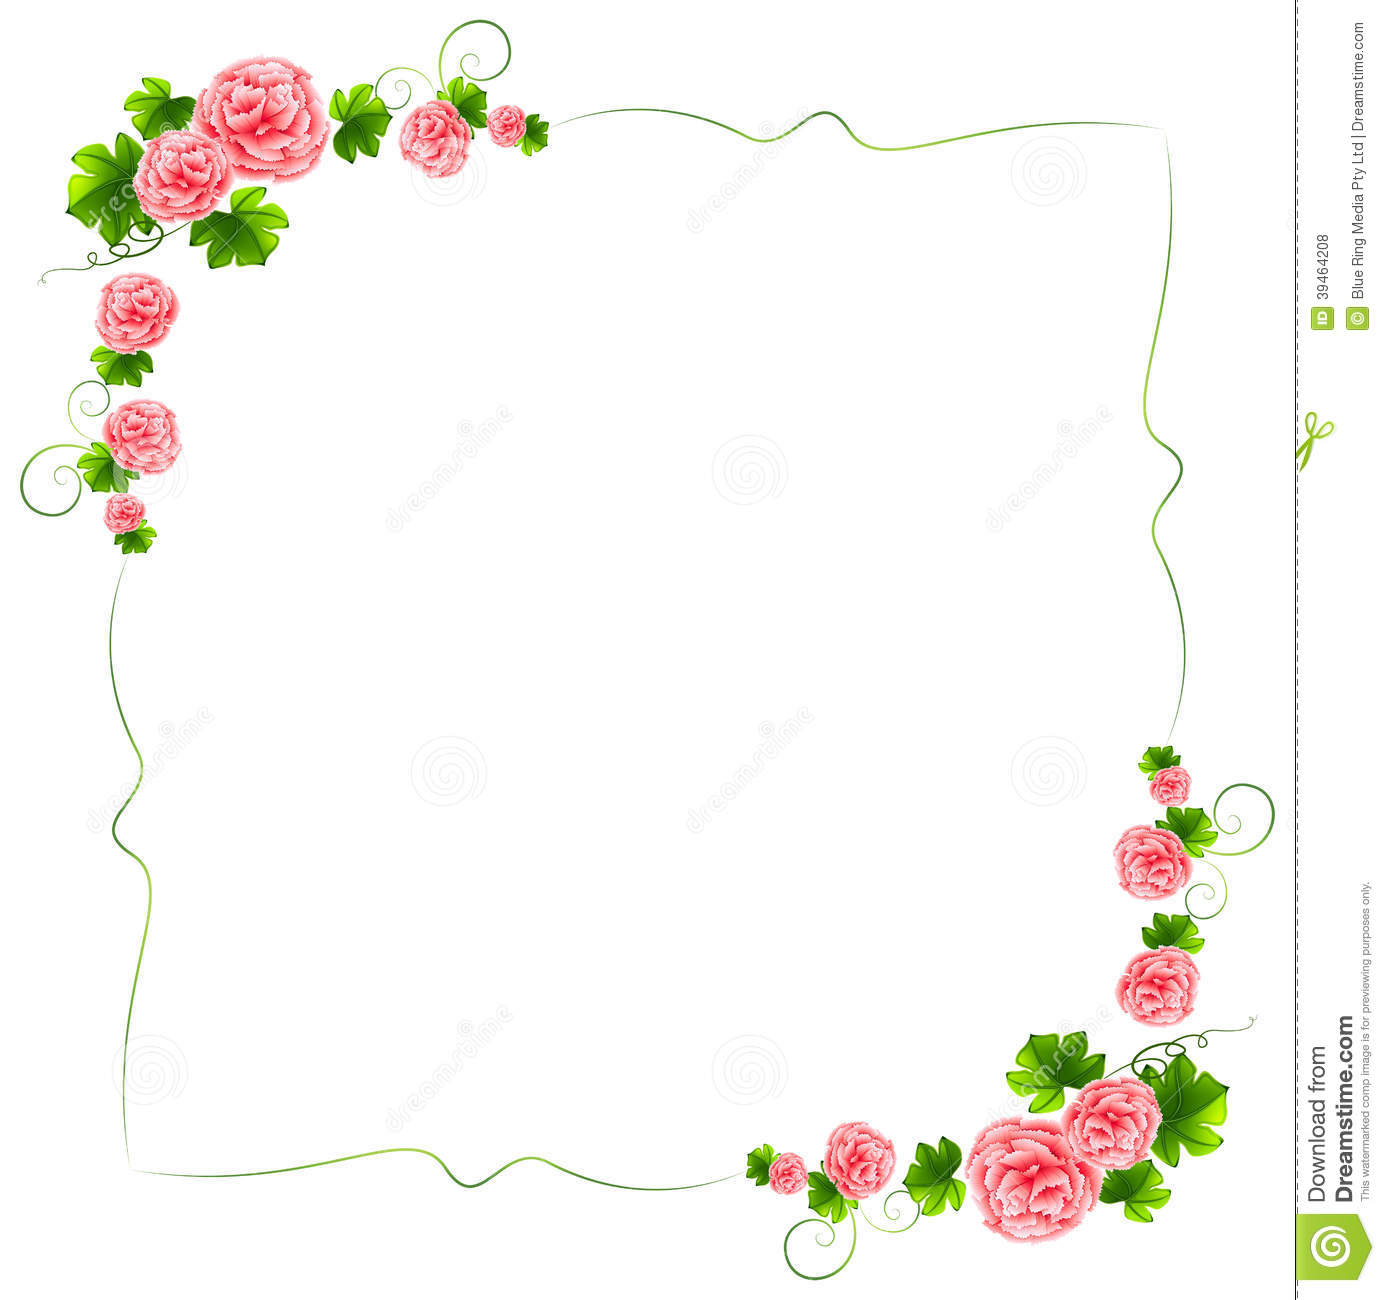 Illustration Of A Border With Carnation Pink Flowers On A White